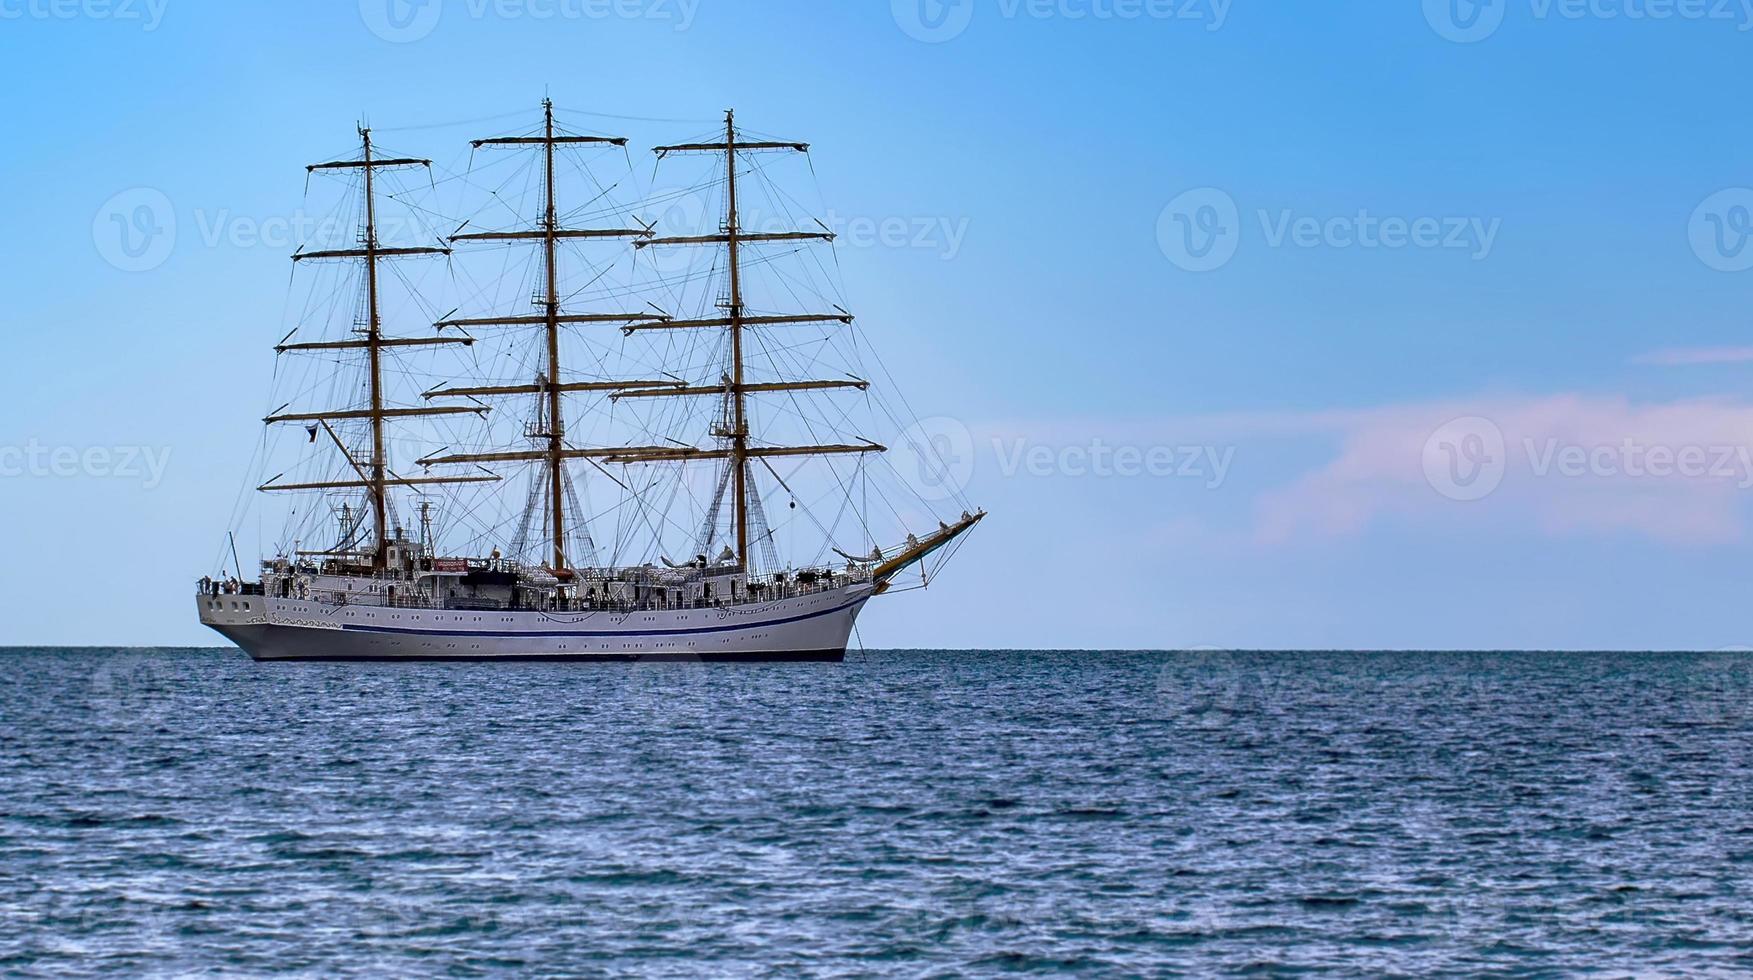 Sailing ship in the sea without sails. Selective focus photo